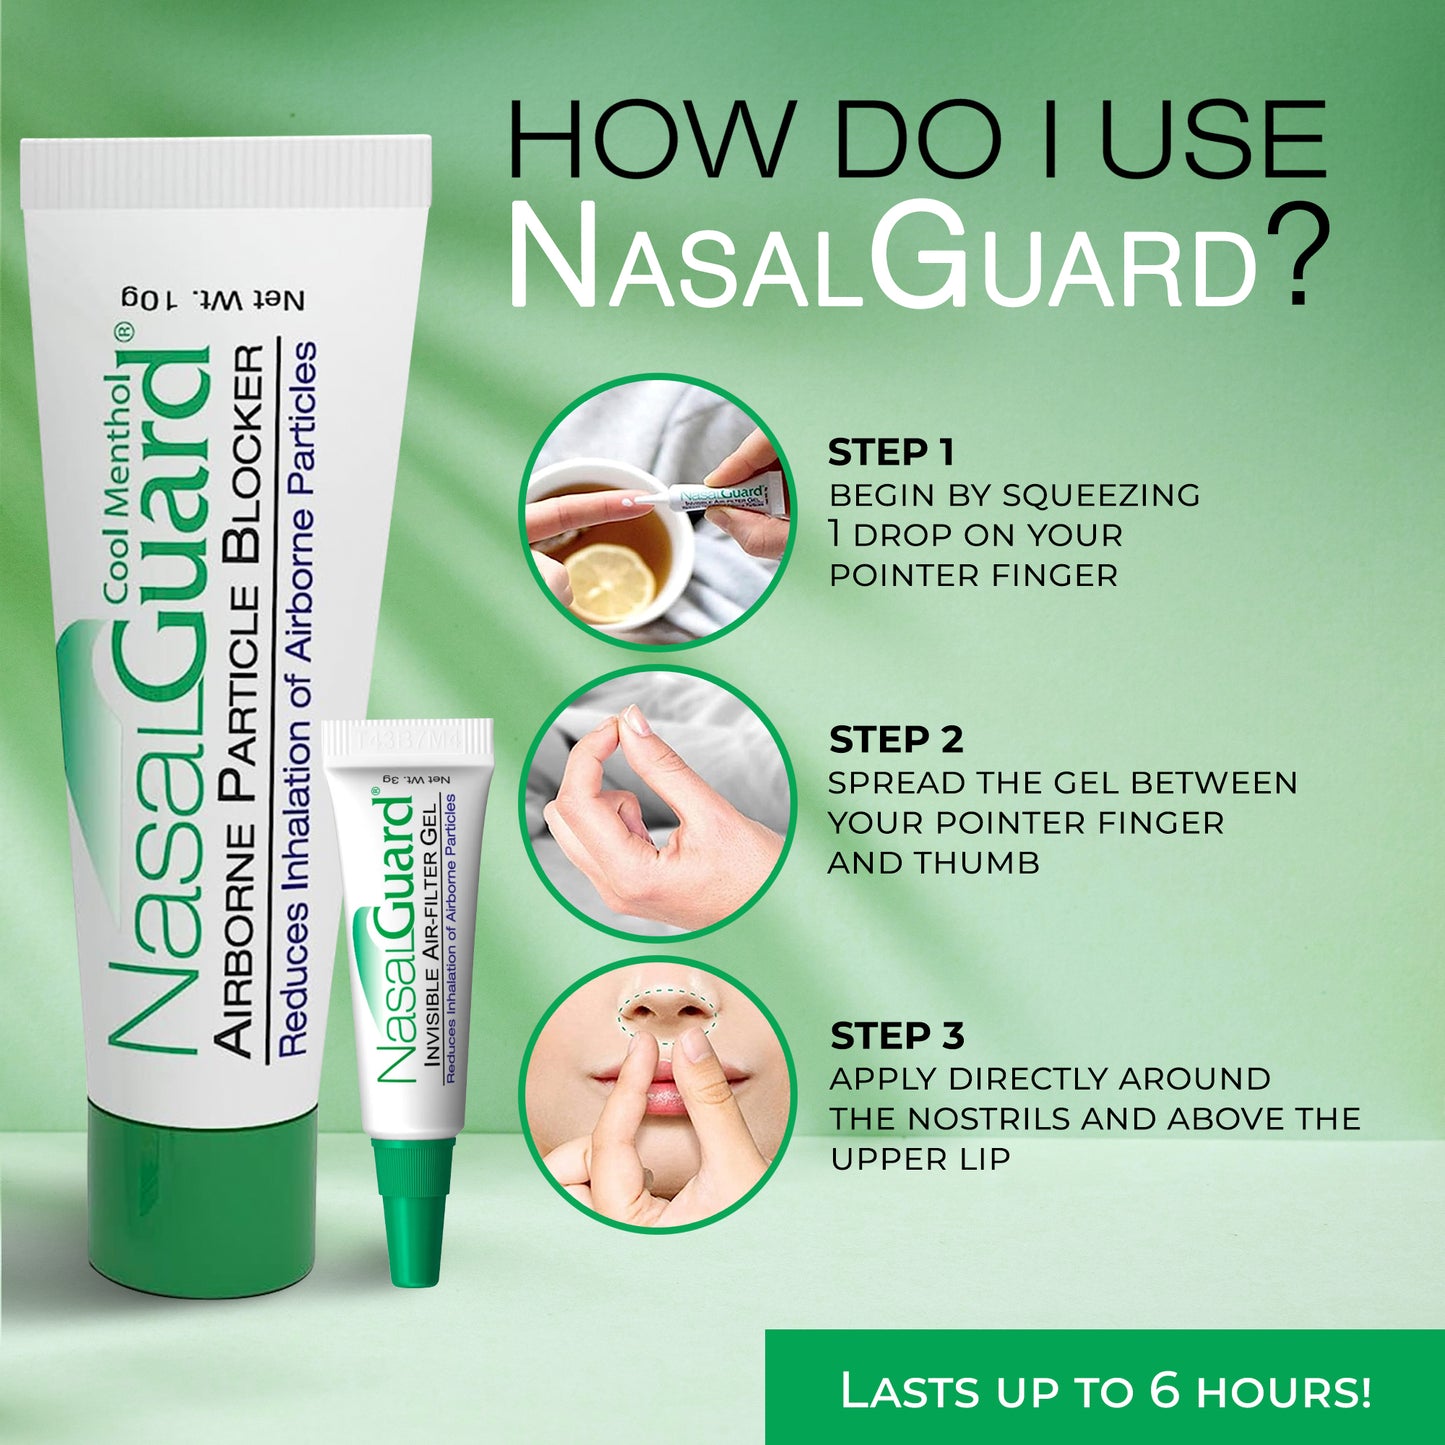 NasalGuard For Air Travelers, Airborne Particle Blocker | Cool Menthol | 3g Tube